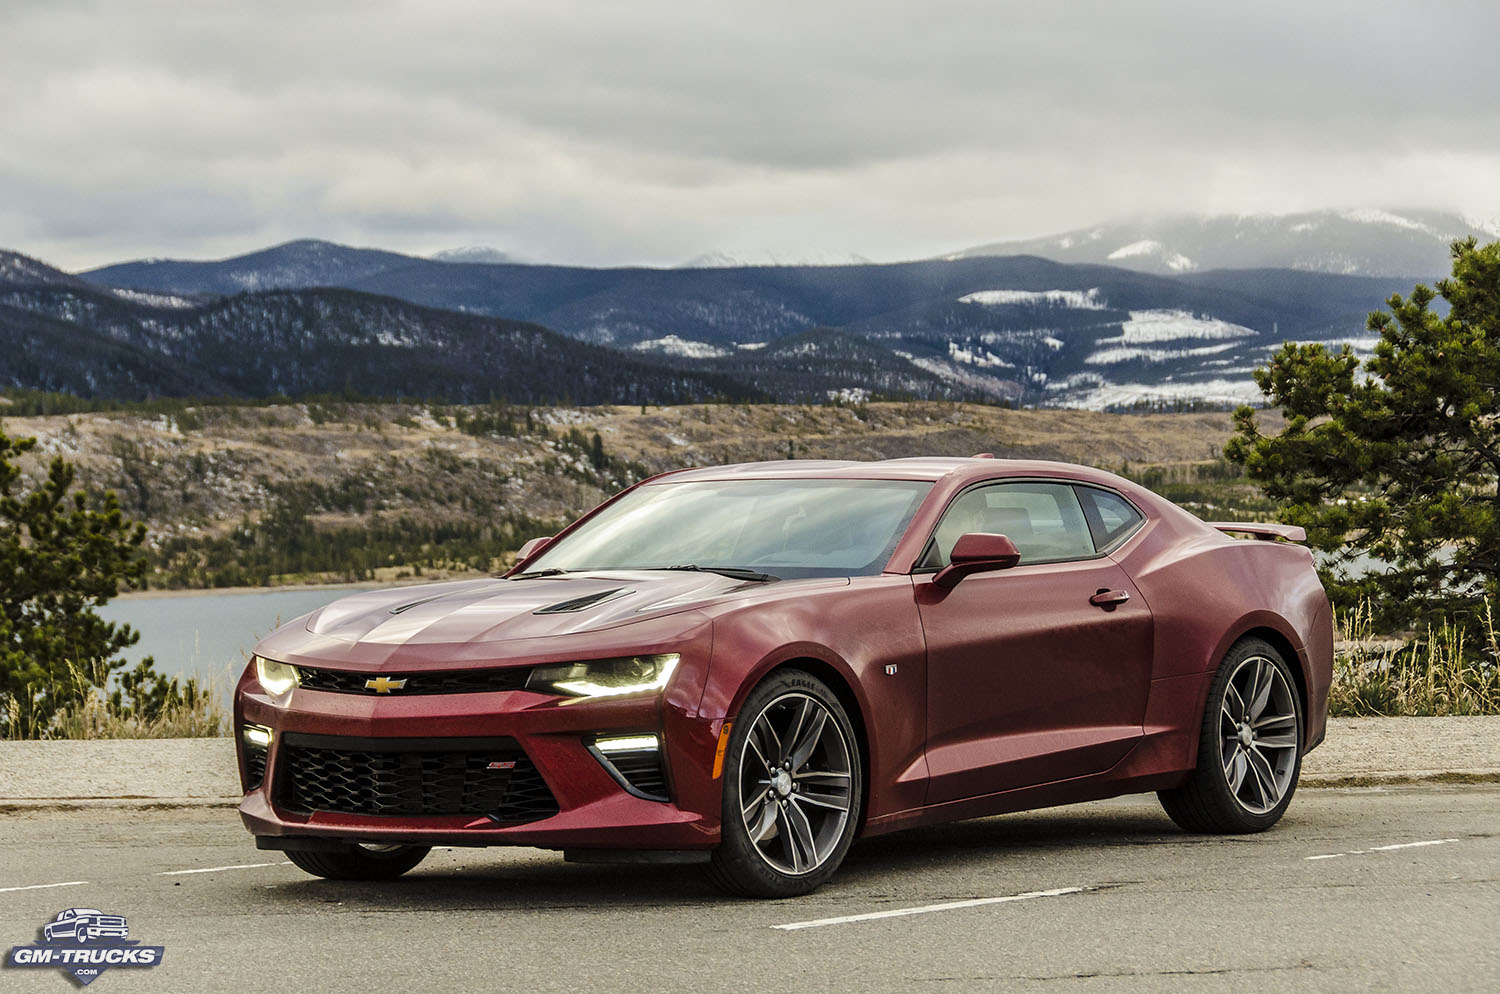 More information about "Finding New Roads Driving the Sixth Generation 2016 Camaro SS"